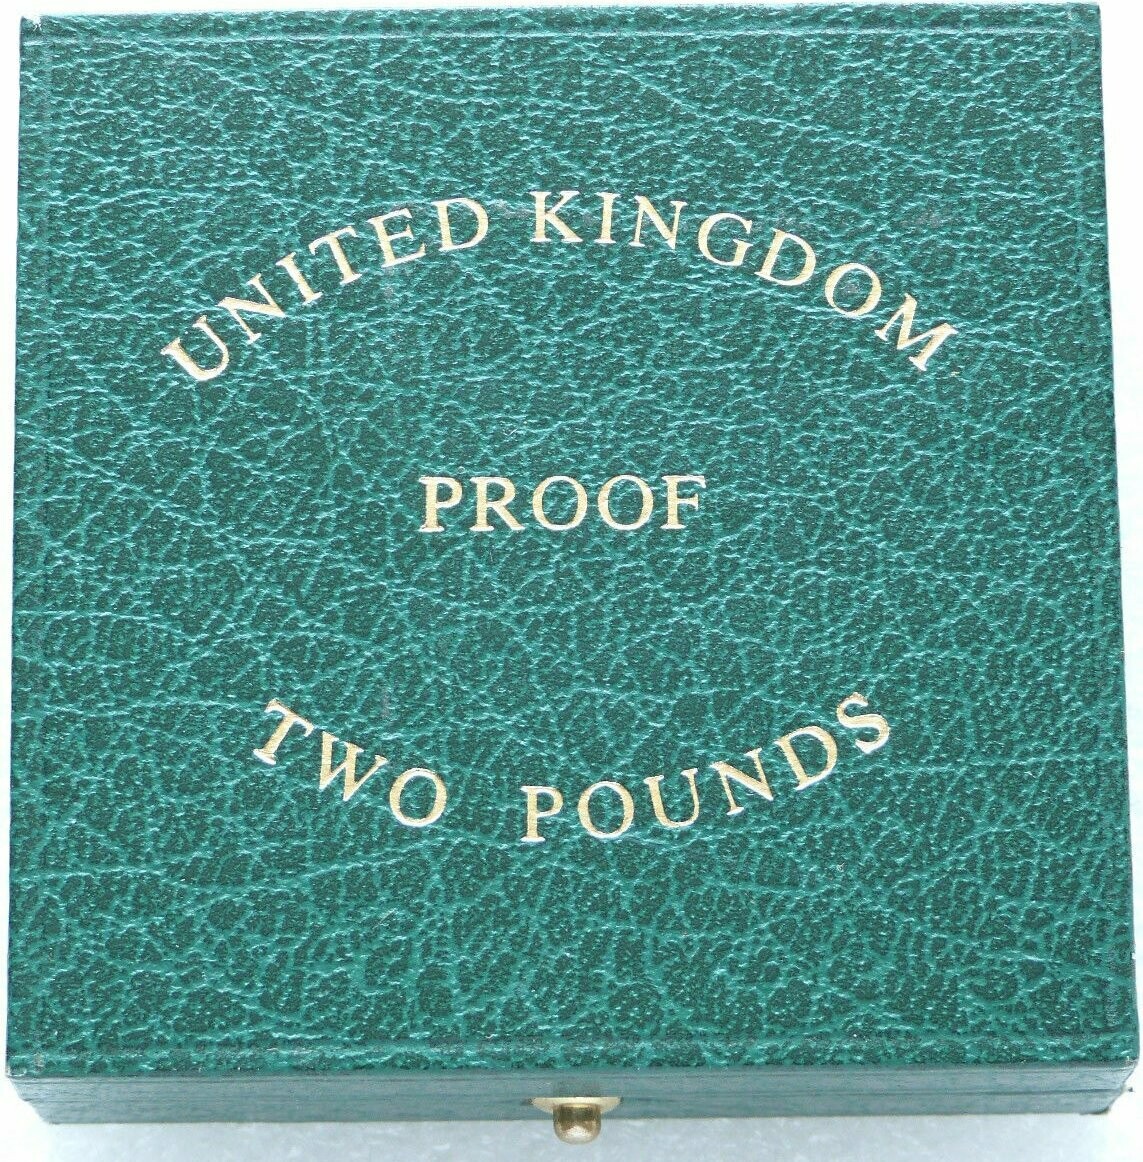 1988 Royal Mint Green Leather £2 Double Sovereign Gold Proof Coin Box Only